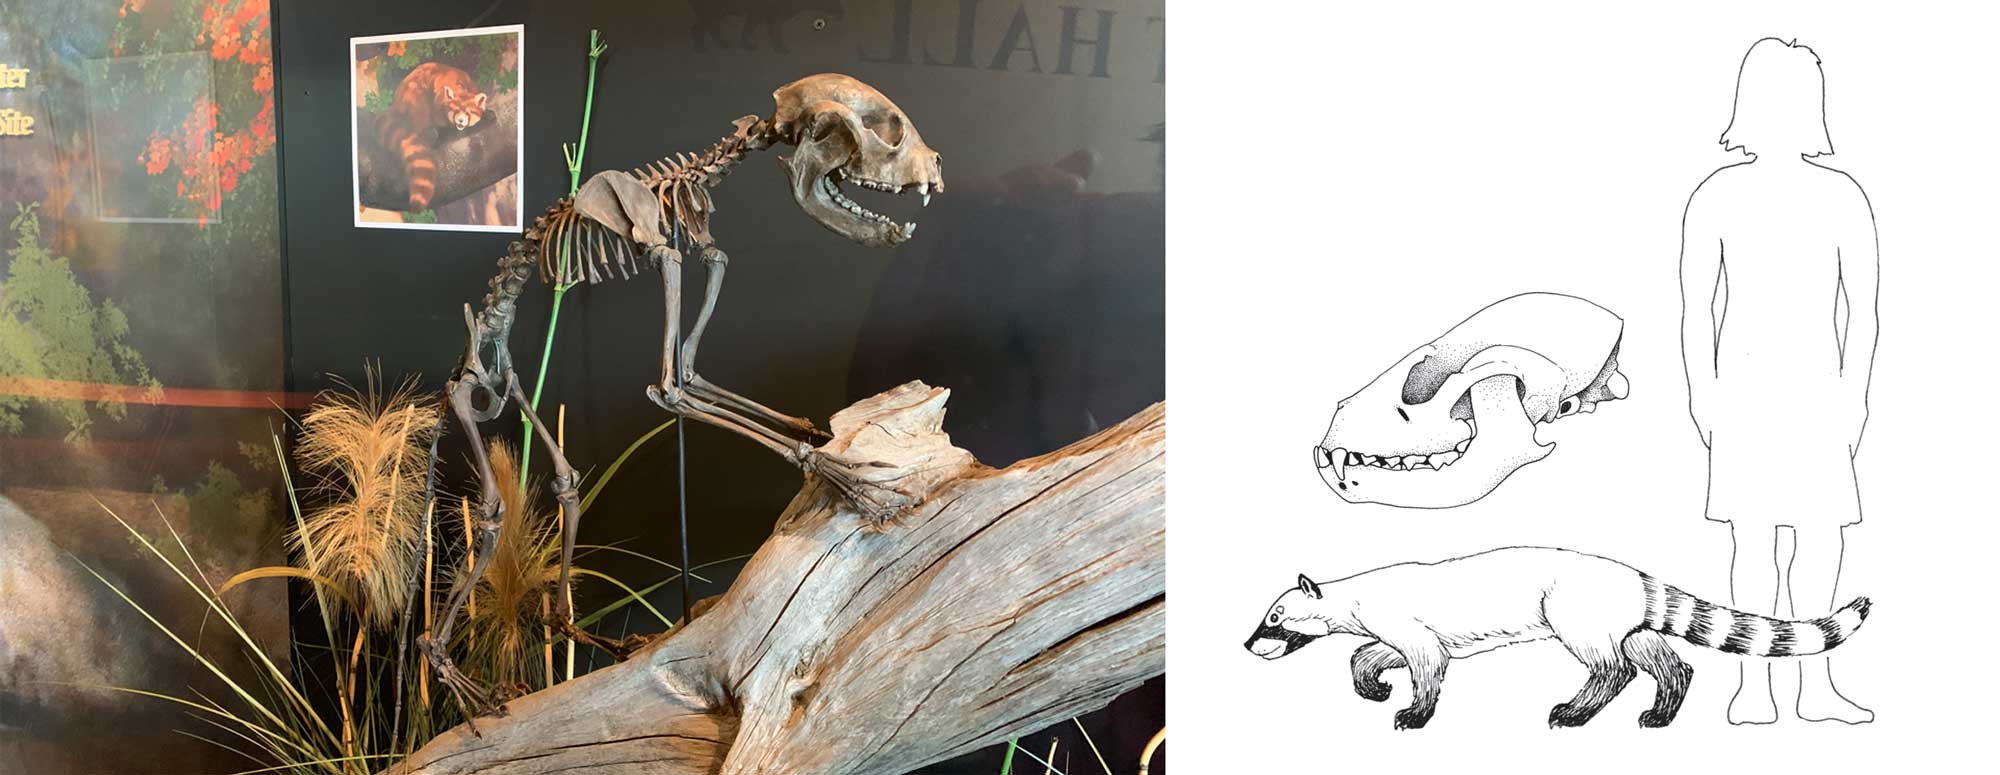 2-Panel figure. Panel 1. Photograph of a skeleton of Pristinailurus bristoli, an extinct red panda. Panel 2. Drawing of a reconstruction of Pristinailurus showing its scale next to a human (about knee-high) under a drawing of a Pristinailurus skull.